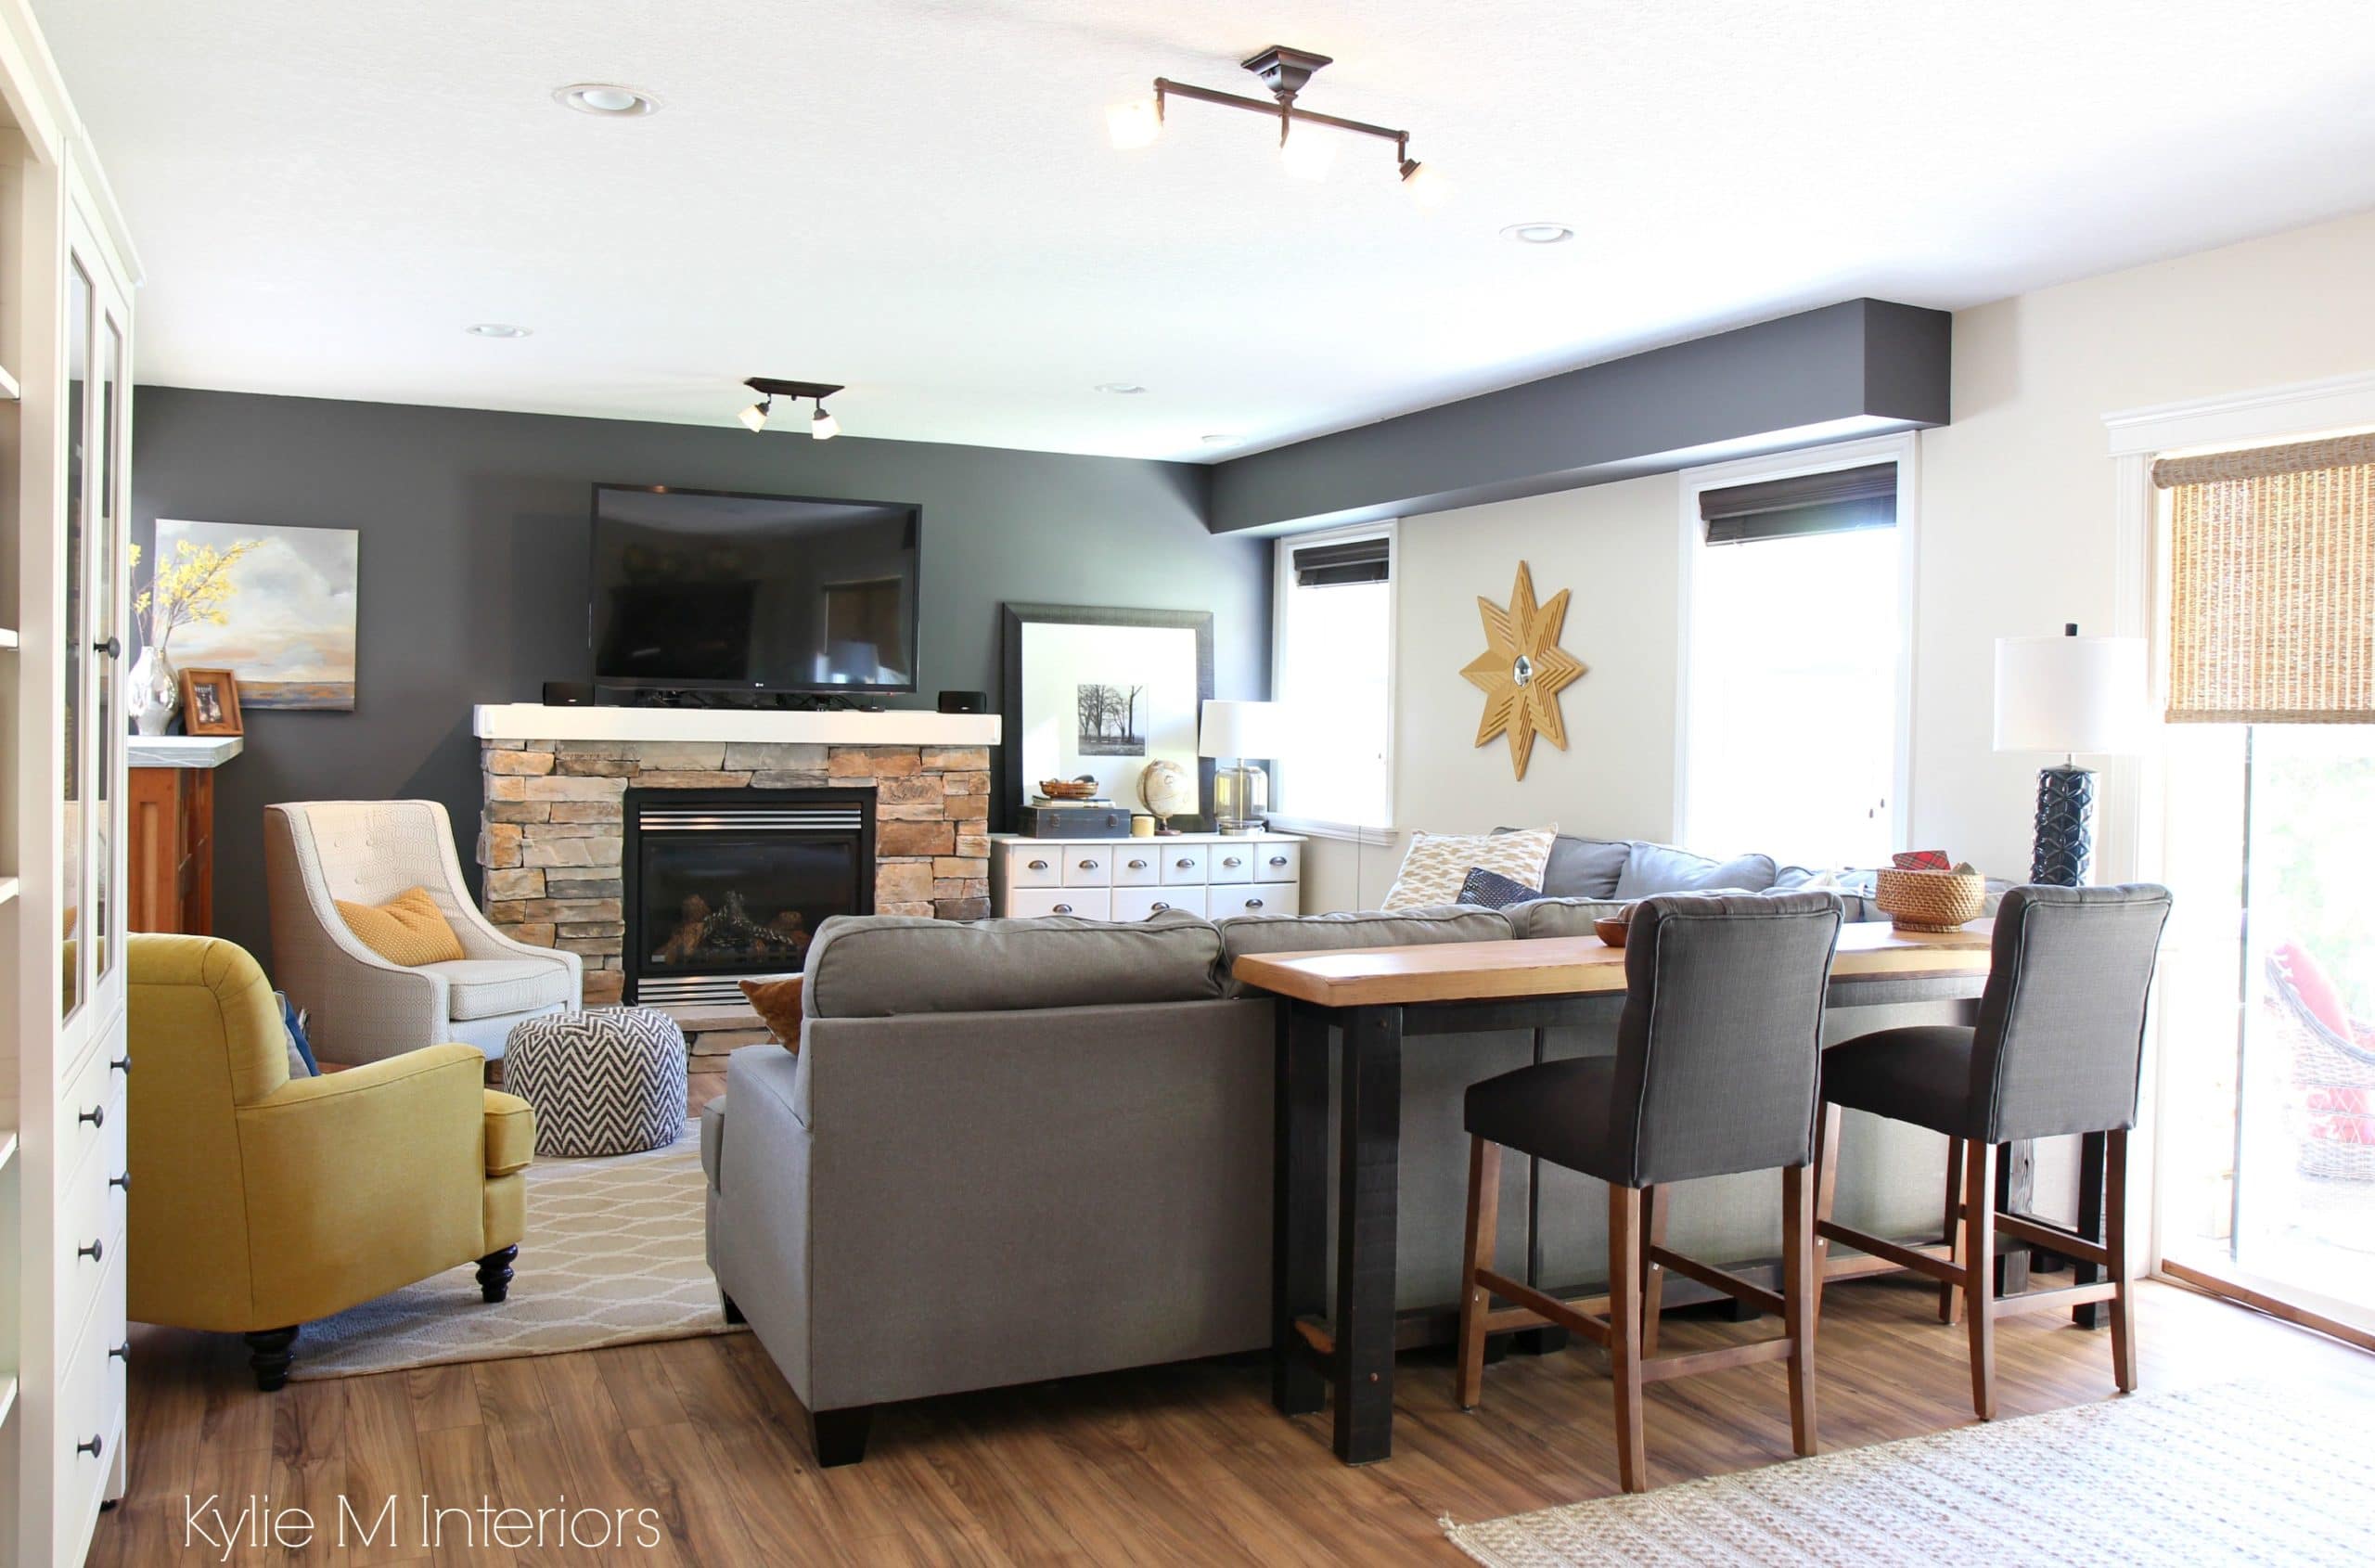 Family room decorating ideas with tv over stone fireplace, gold accents, Benjamin Moore Gray, sectional, live edge sofa table and stools by Kylie M Interiors e-design